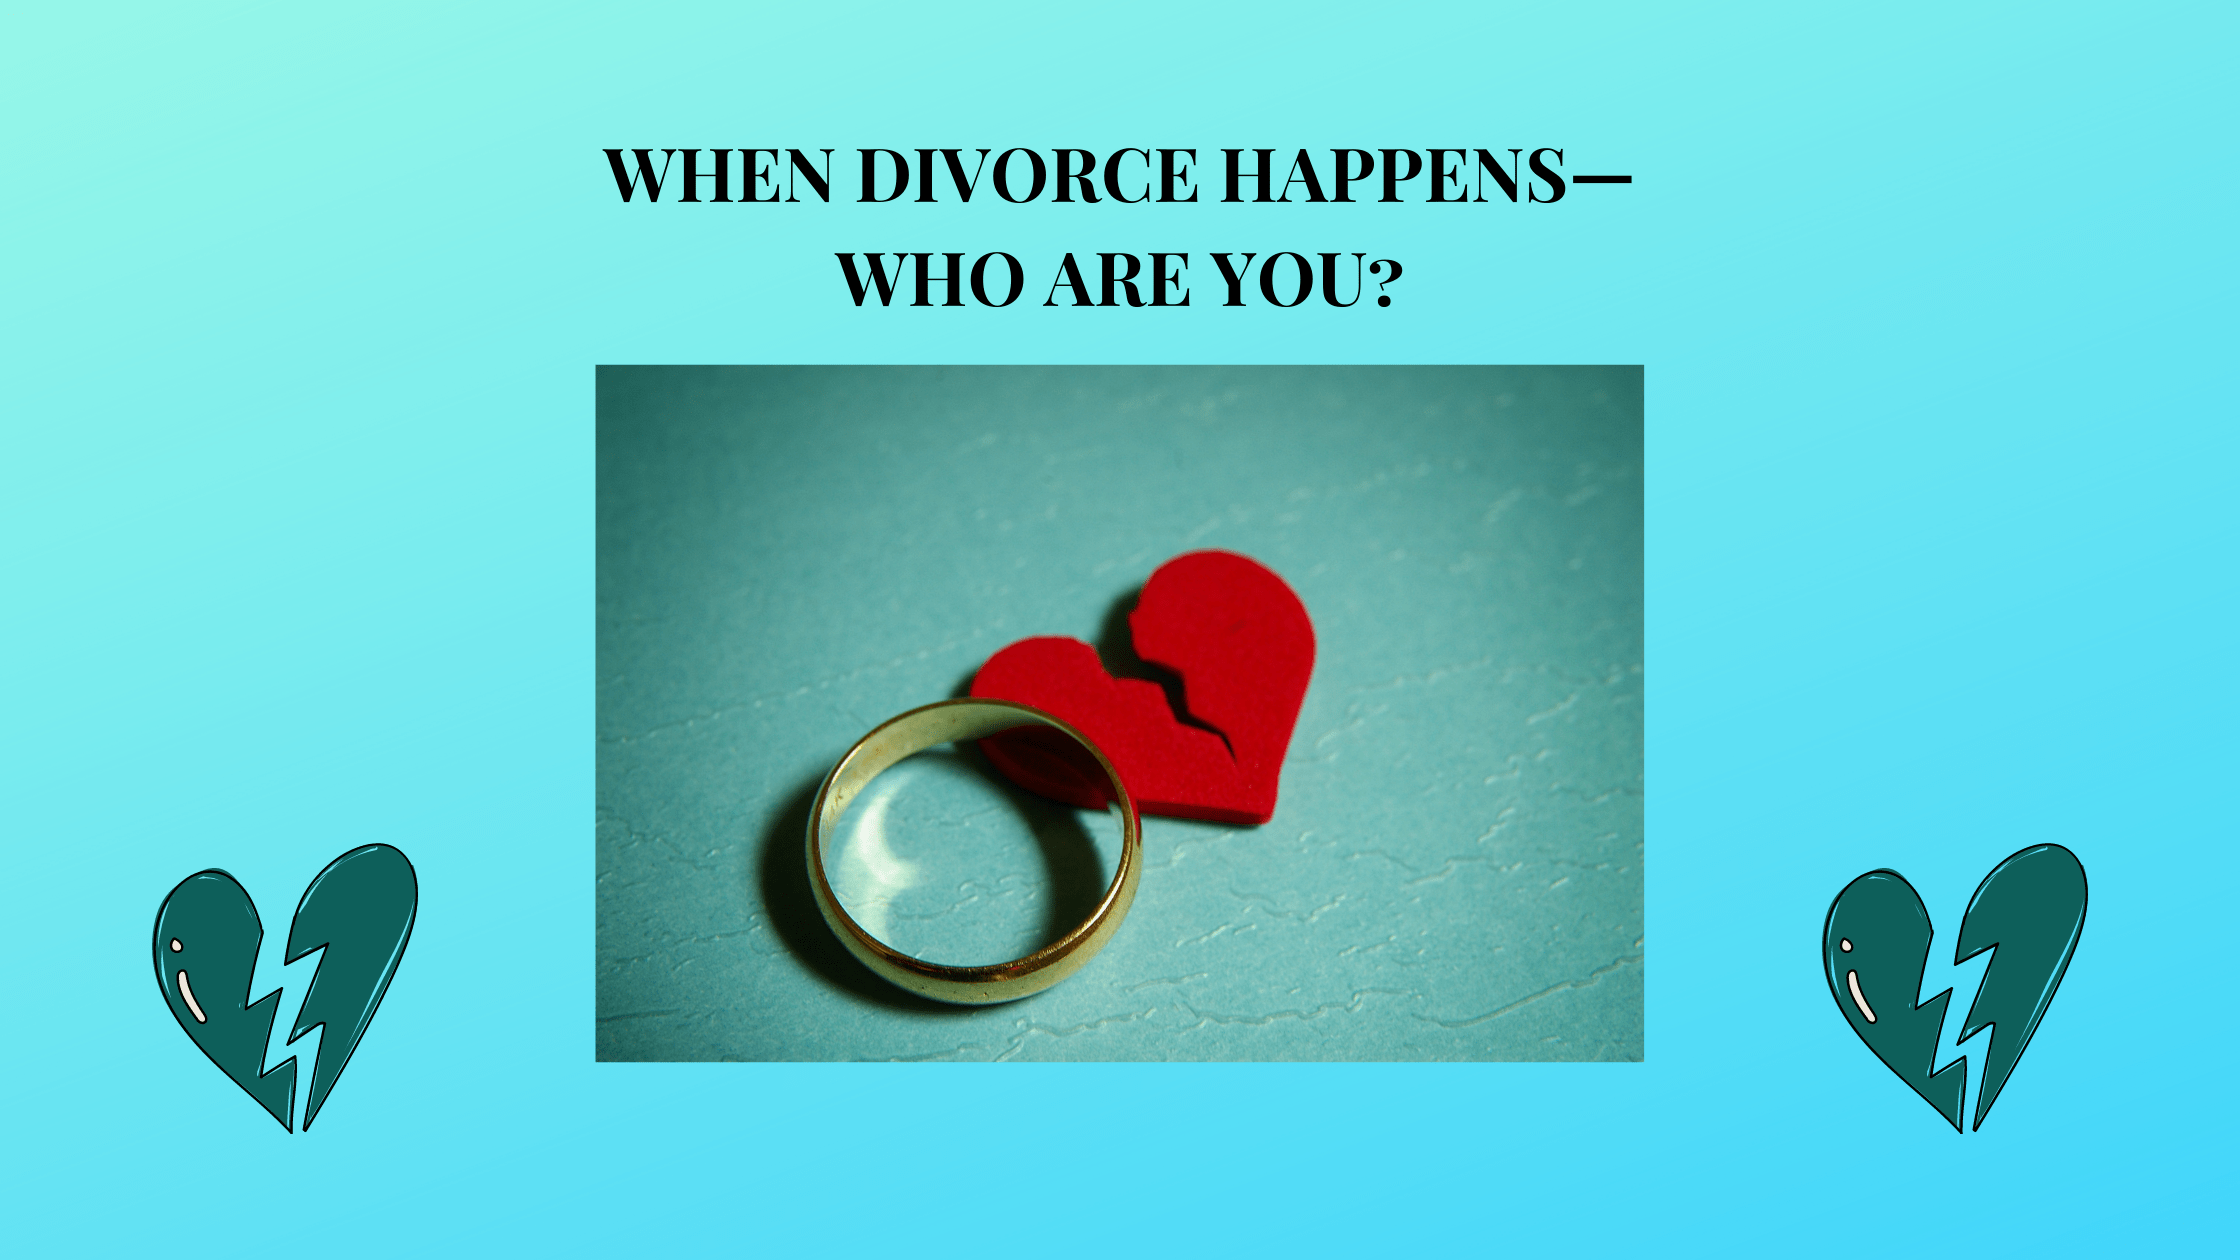 WHEN DIVORCE HAPPENS—WHO ARE YOU? PART 1 OF 2